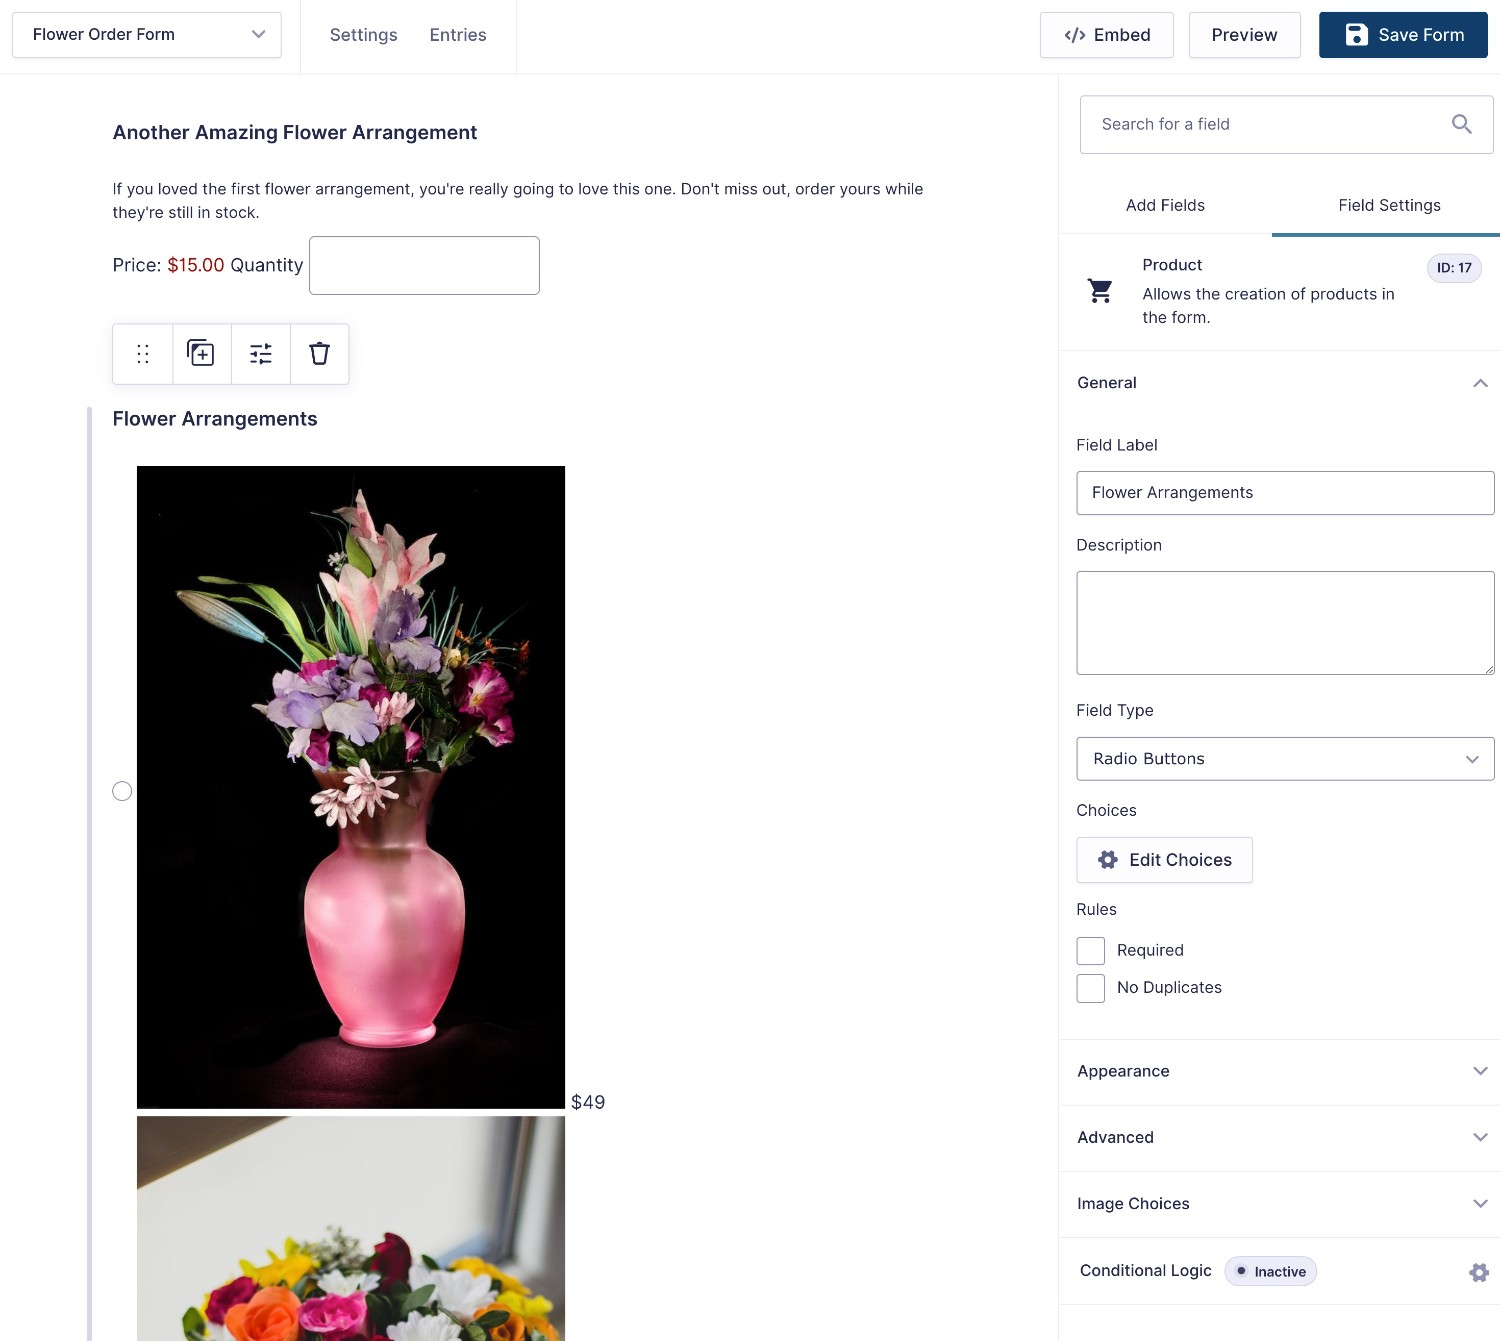 Add images to your florist order form